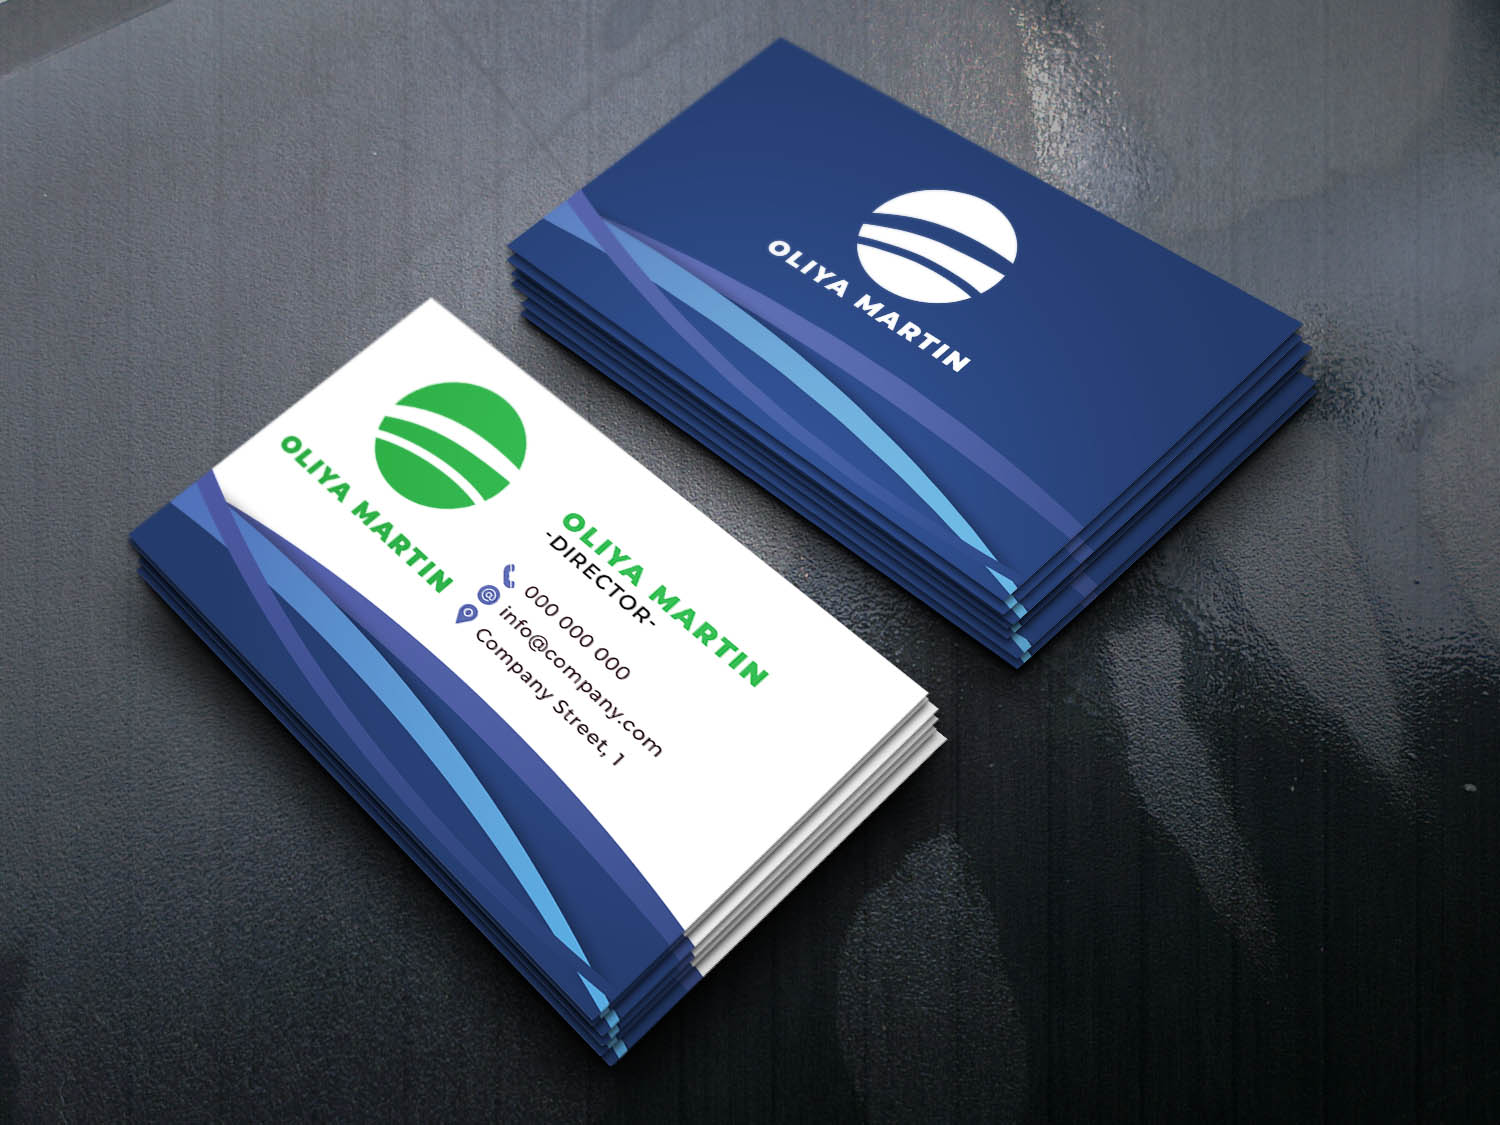 Luxurious Business card design for $5 - SEOClerks